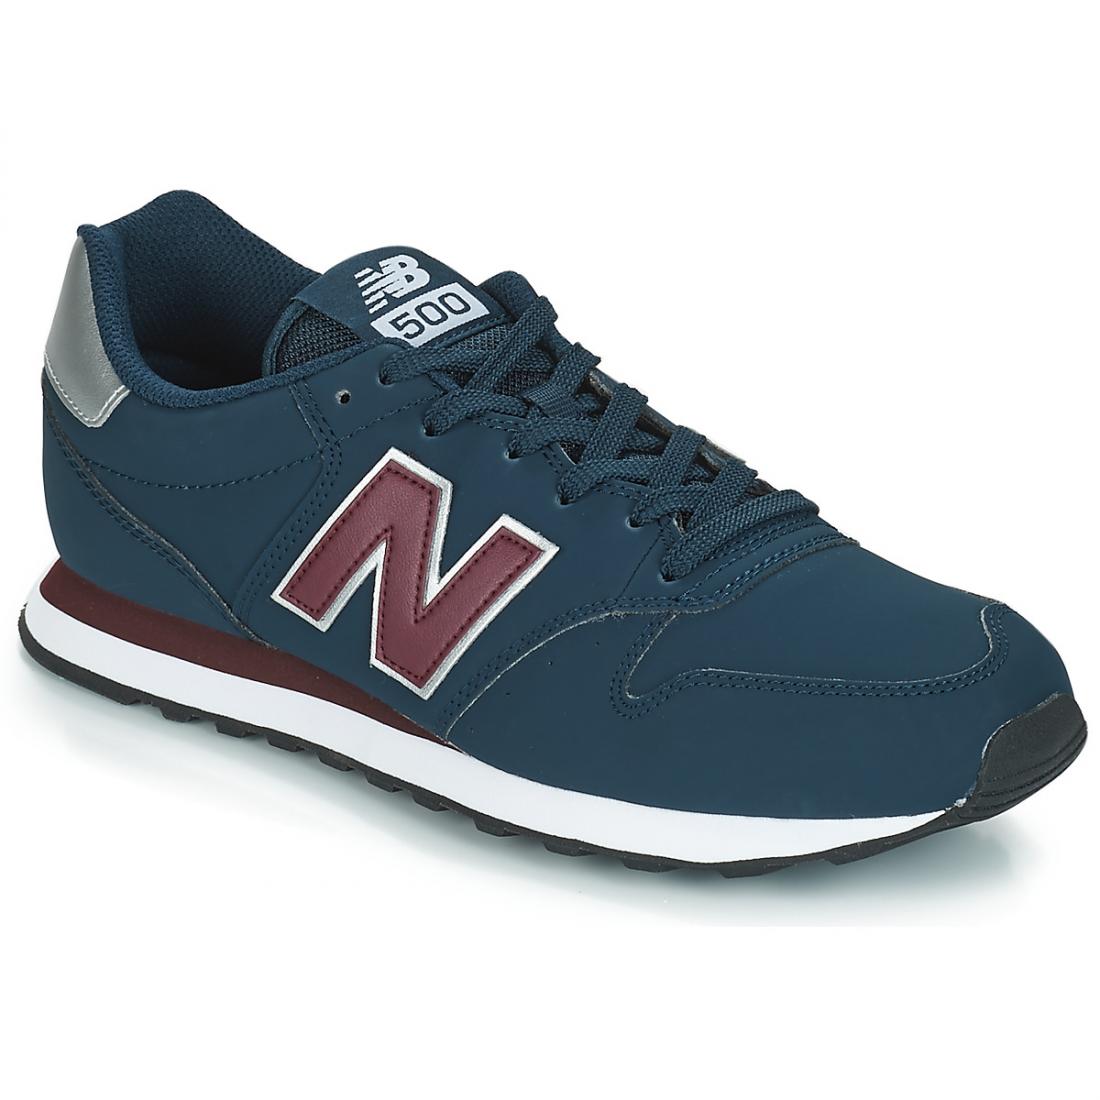 New Balance Gm500 Blue Hot Sale, UP TO 54% OFF